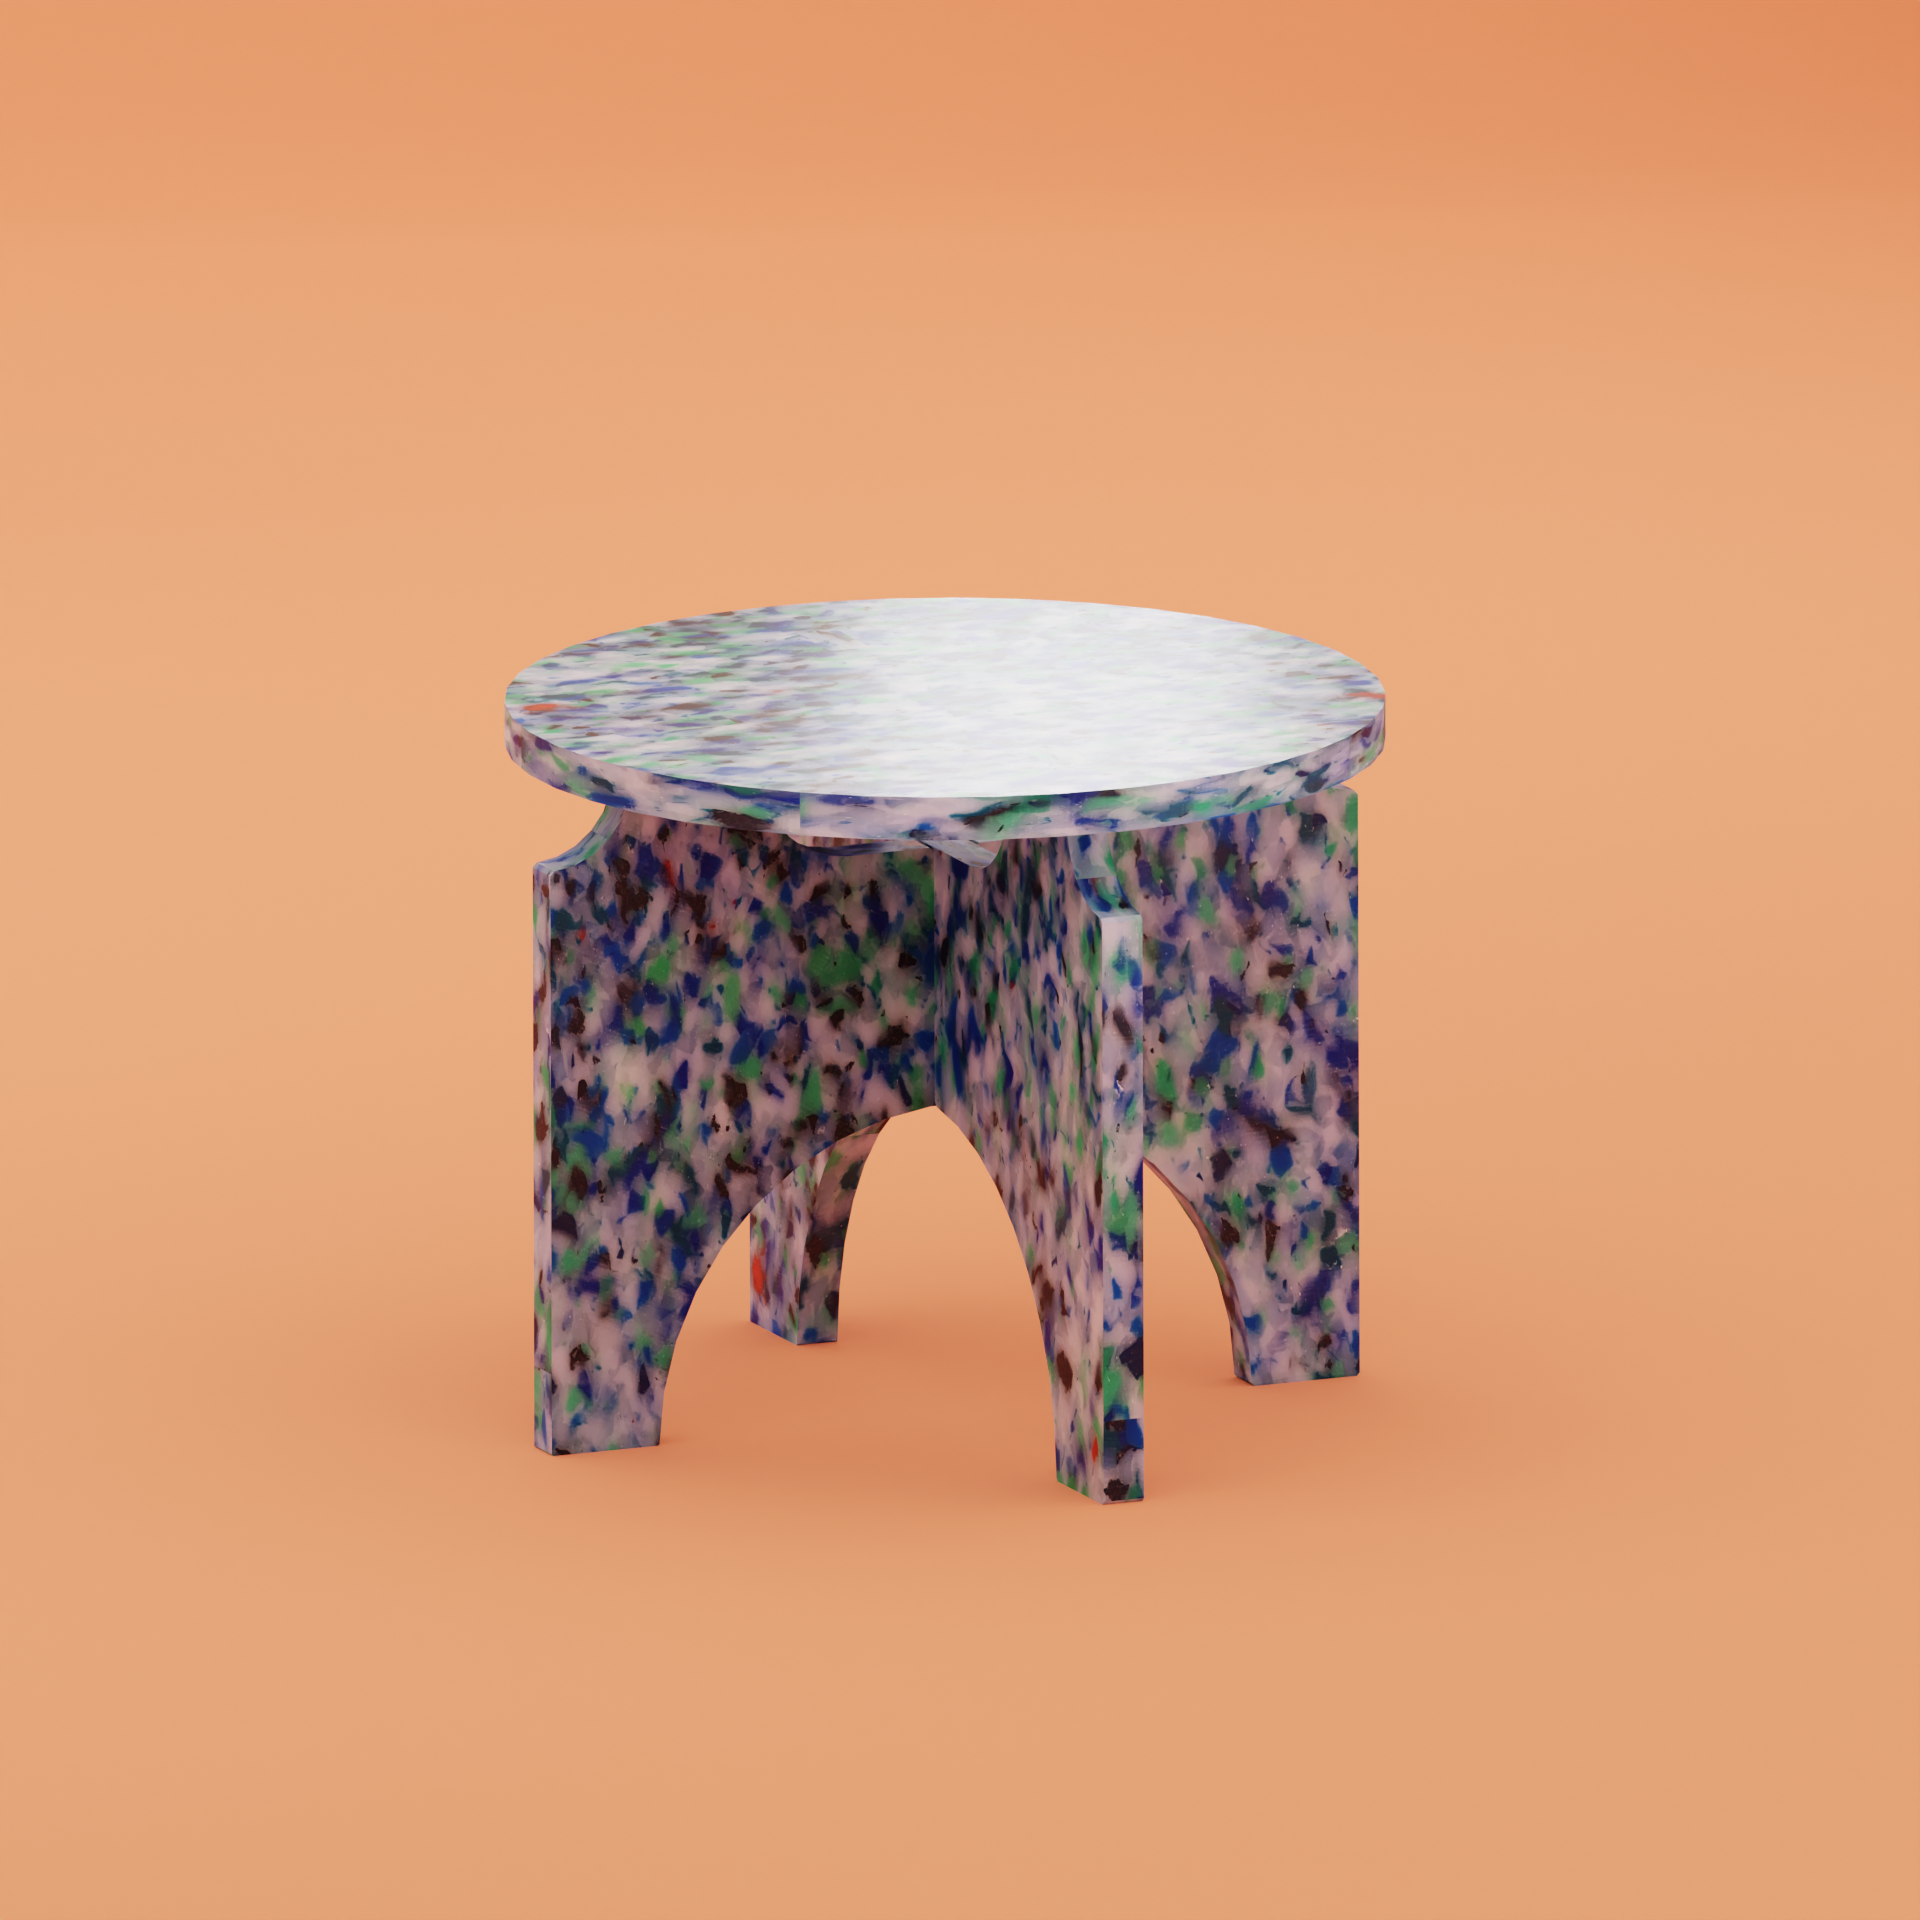 STOOL BY THE MINIMONO PROJECT - BRAND FOR ECO FRIENDLY - PLAYFUL - MULTI FUNCTIONAL - SUSTAINABLE - HIGH QUALITY - DESIGN FURNITURE FROM RECYCLED PLASTIC FOR BOTH ADULT AND CHILDREN MADE IN BERLIN GERMANY